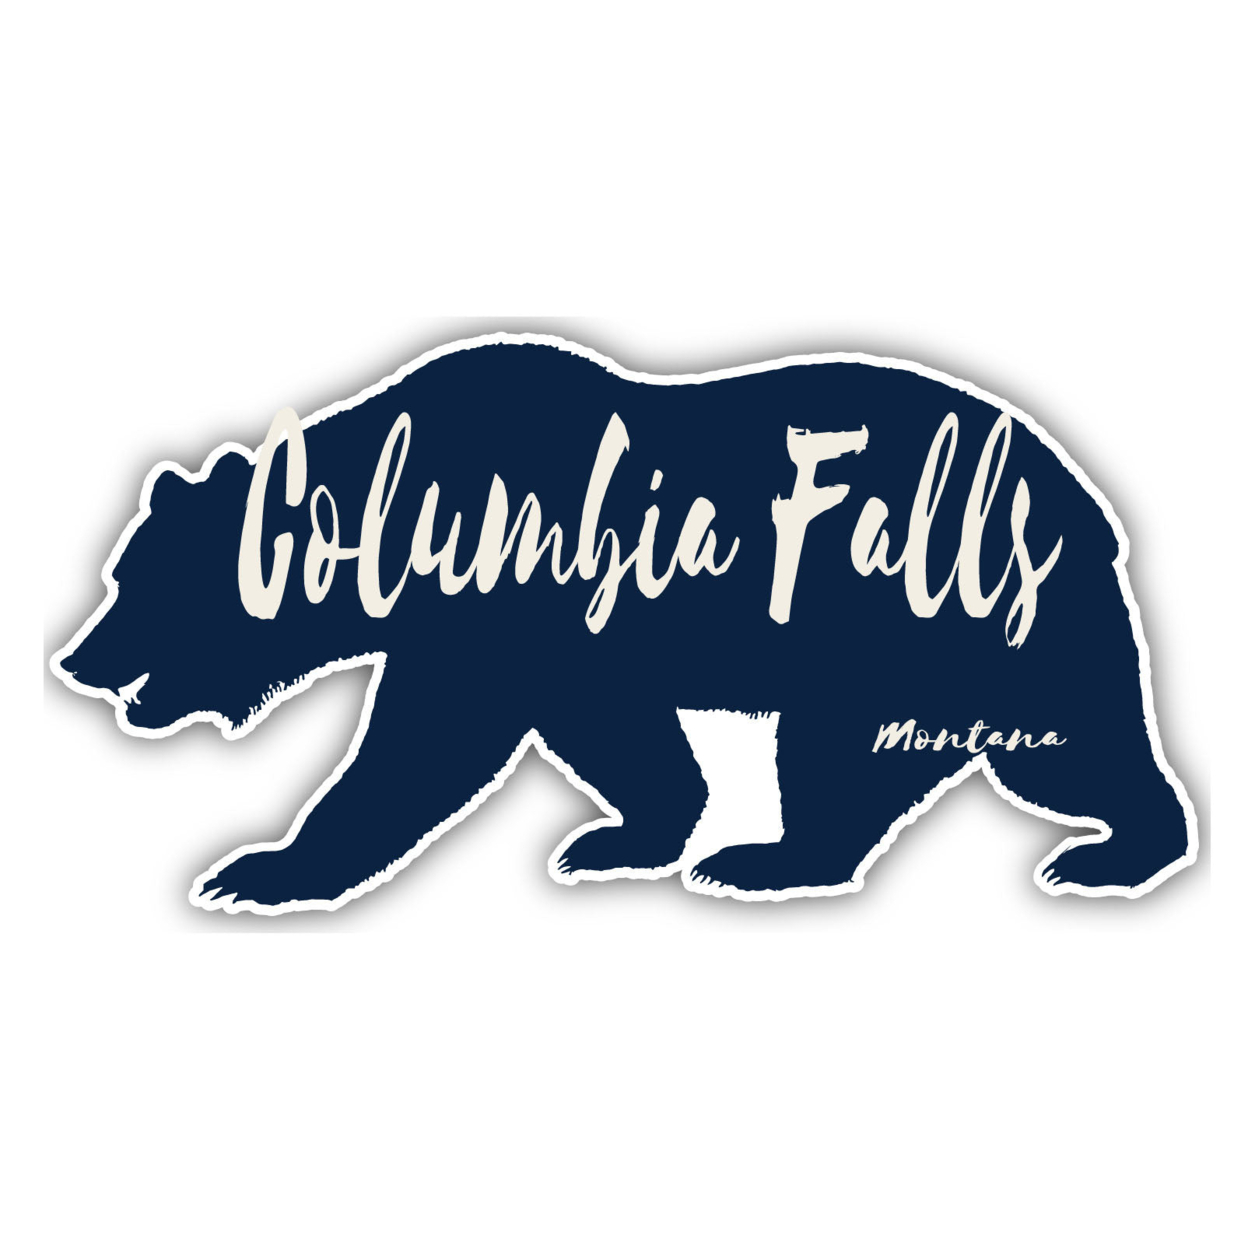 Columbia Falls Montana Souvenir Decorative Stickers (Choose Theme And Size) - 4-Pack, 4-Inch, Bear